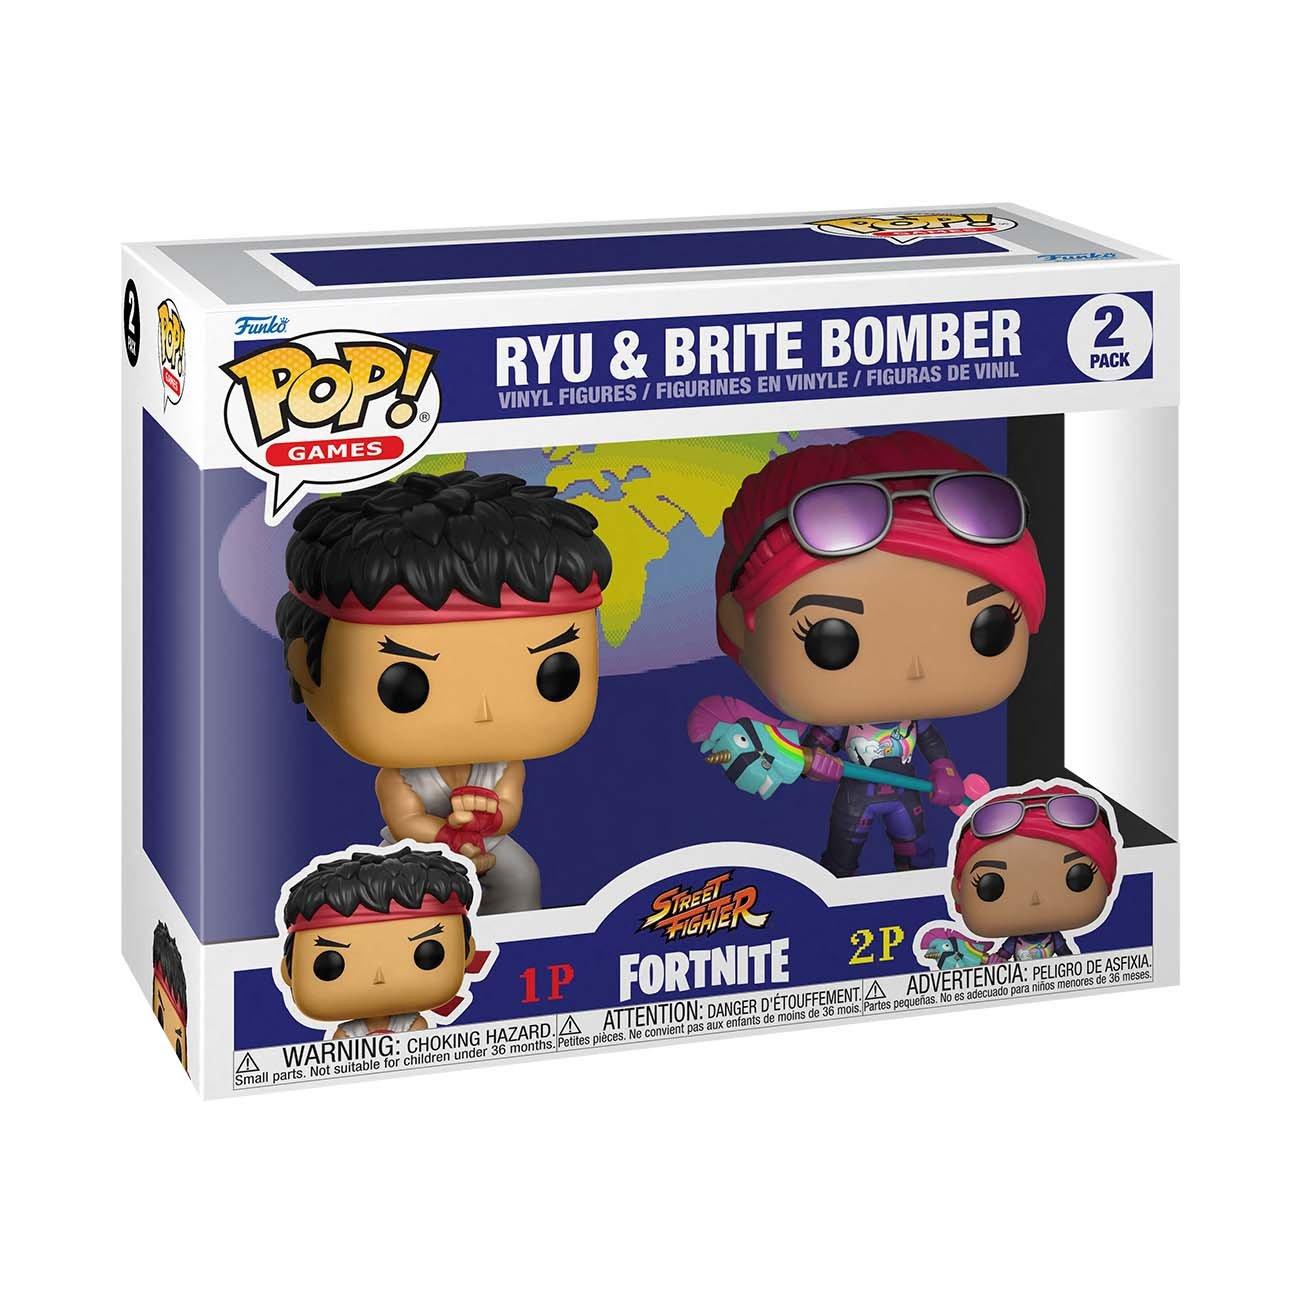 Funko POP! Games: Street Fighter and Fortnite Ryu and Brite Bomber 2-Pack  4.25 Vinyl Figures